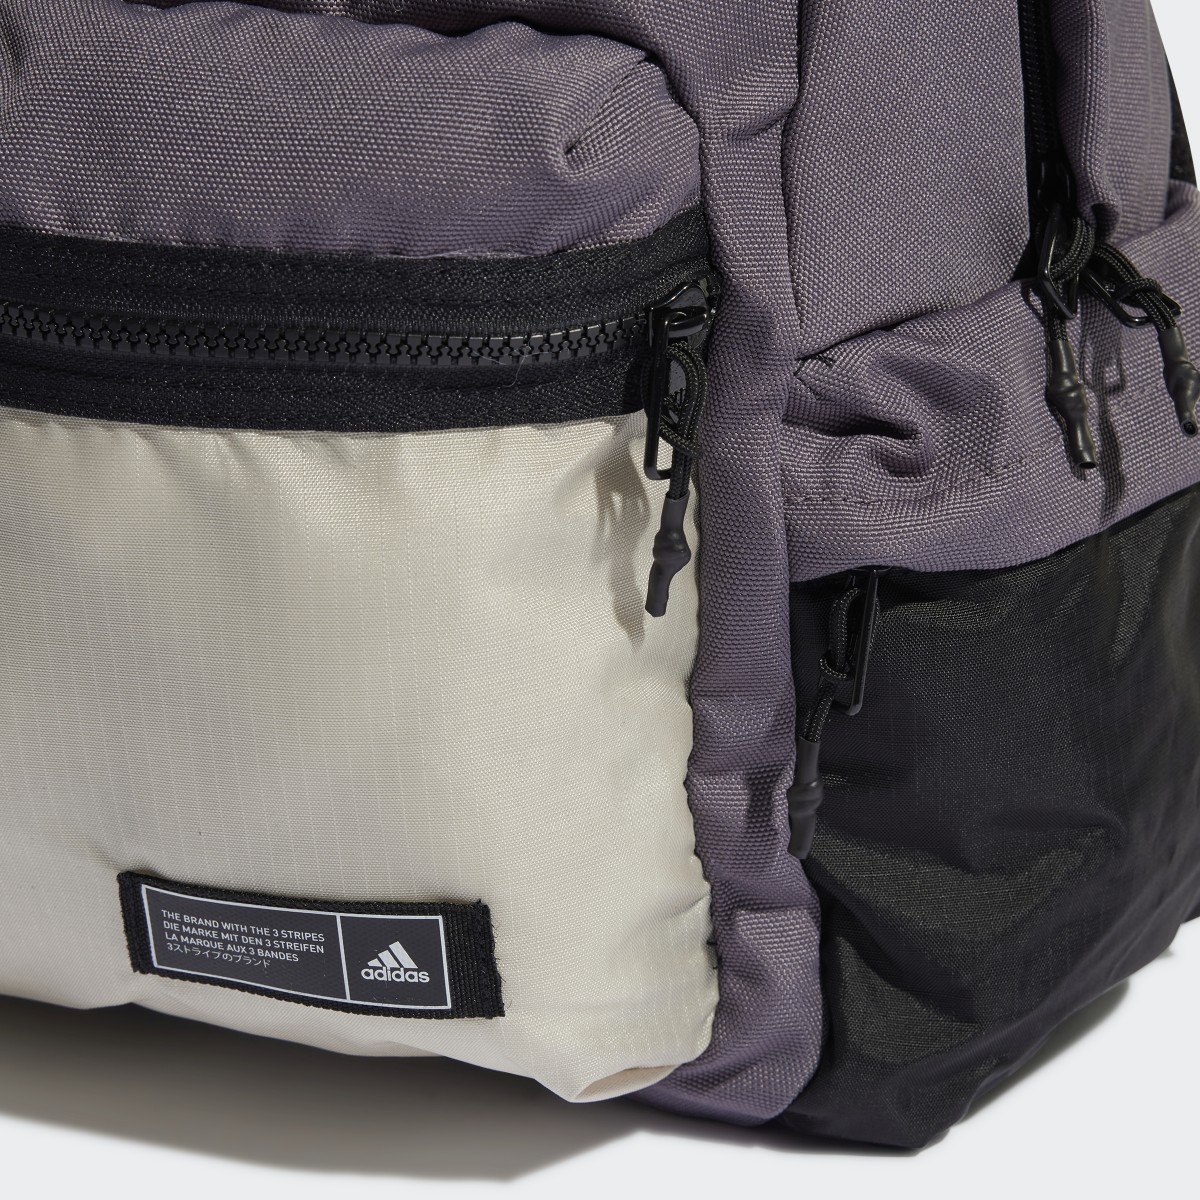 Adidas Classic Badge of Sport Backpack 3. 6